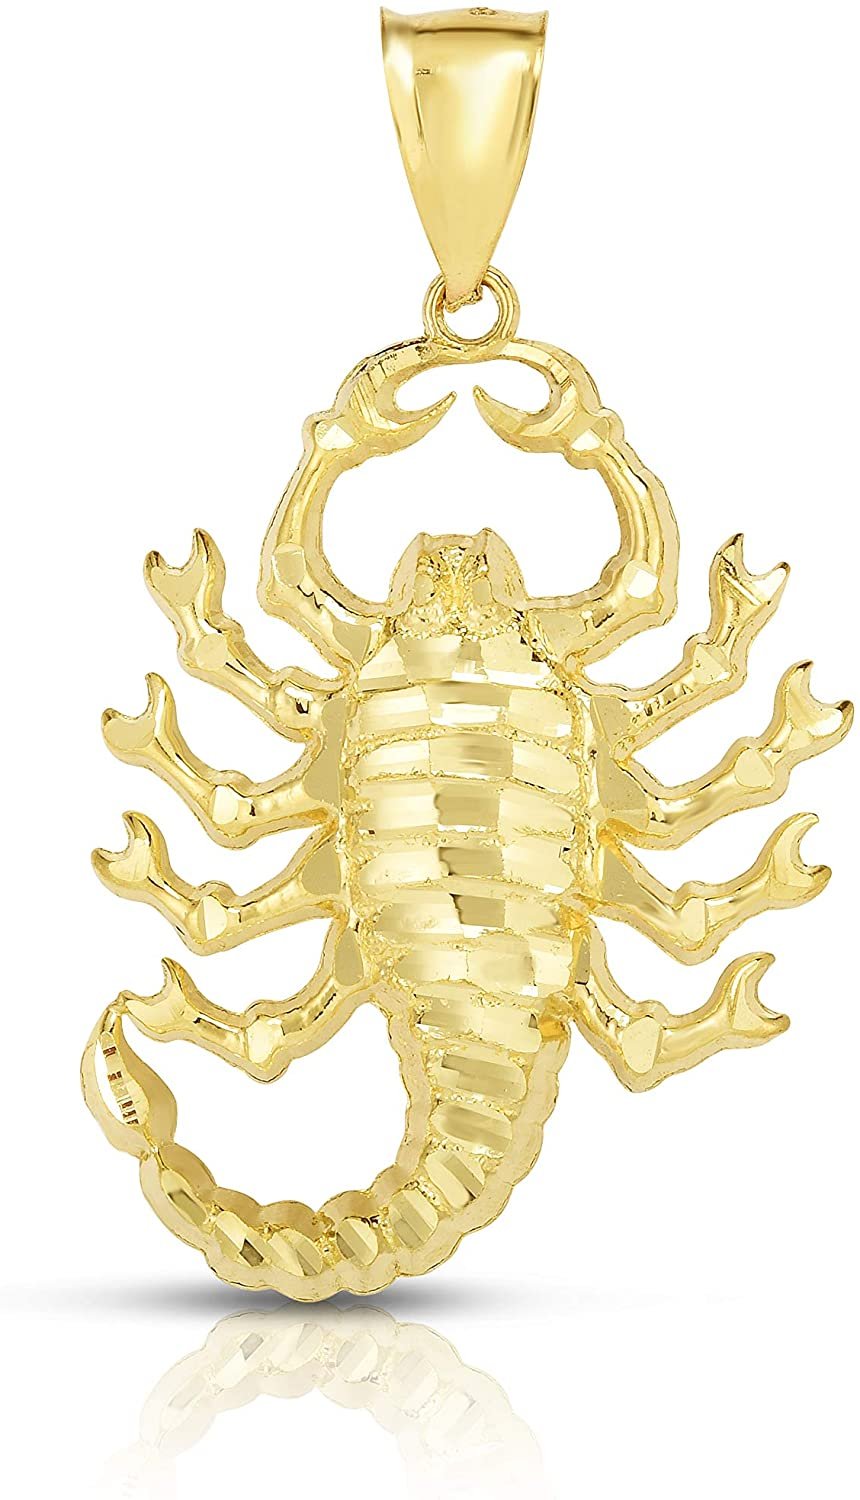 Floreo 10k Yellow Gold Scorpion Pendant for Necklace